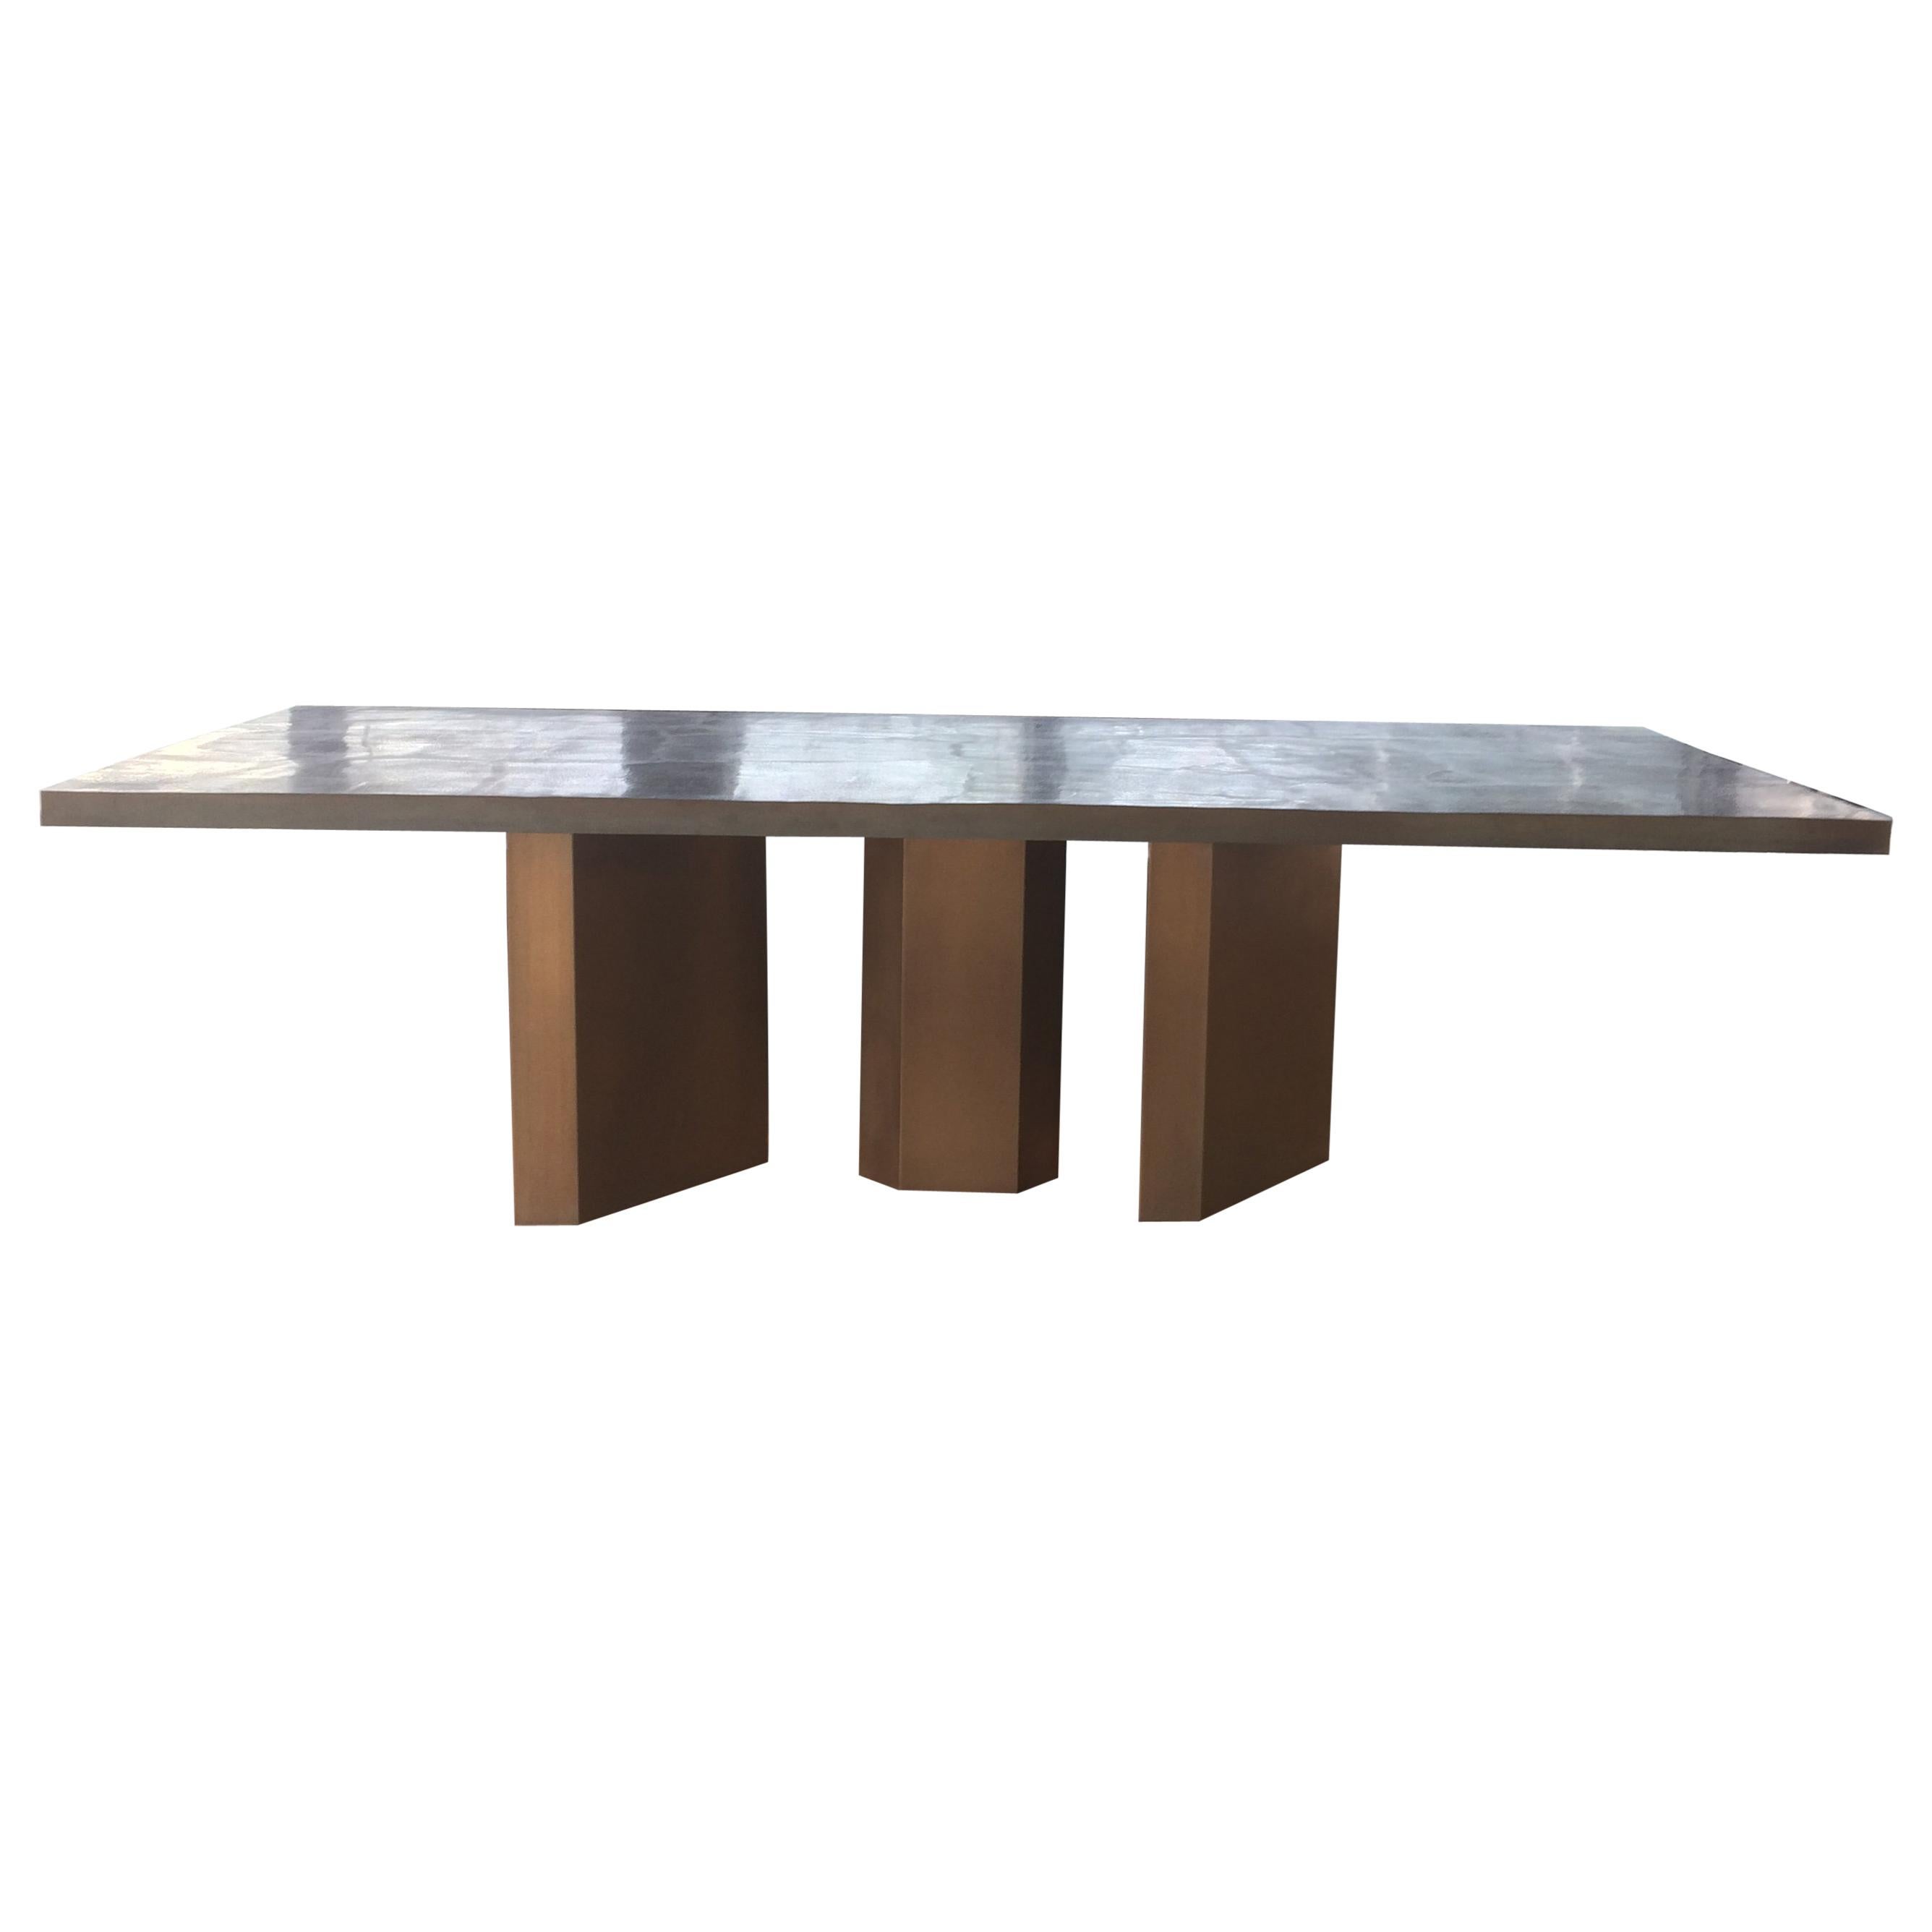 'EA 1706' Shagreen textured Bronze Dining Table, Patina & Polished. Customizable For Sale